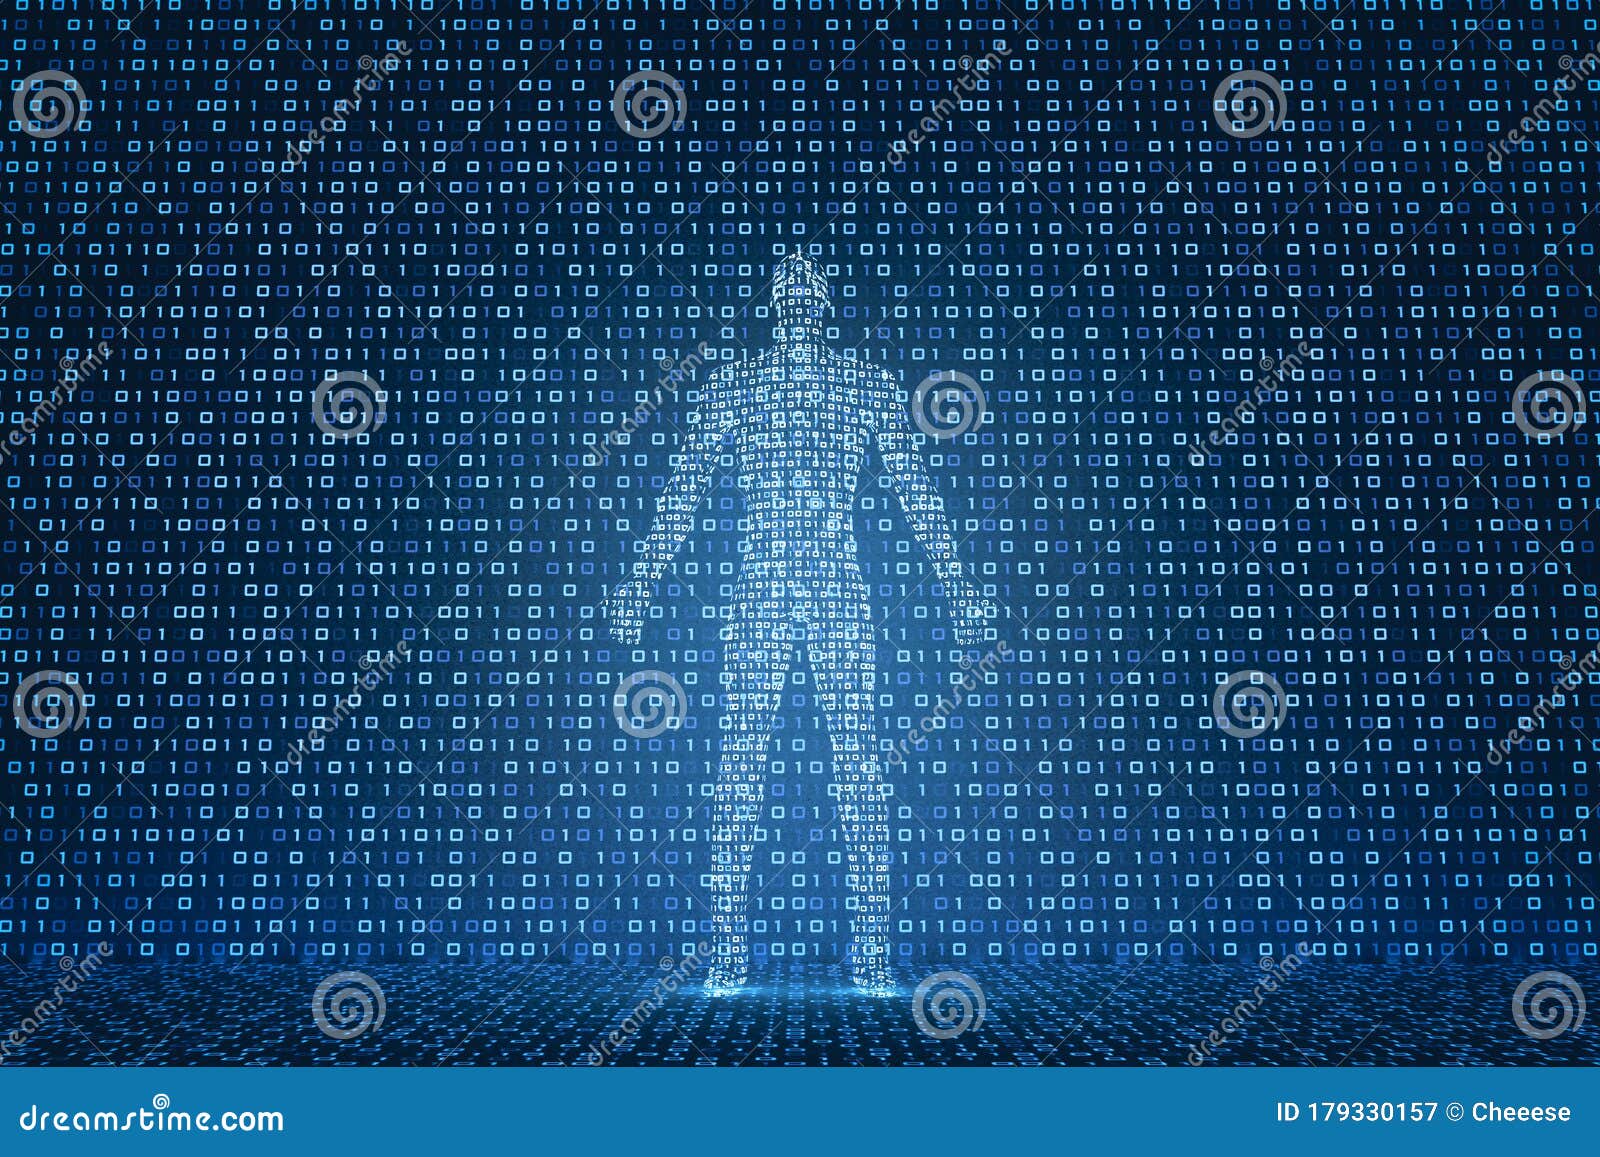 3d model of a digital person on the background of luminous ones and zeros. the concept of man in the era of technology